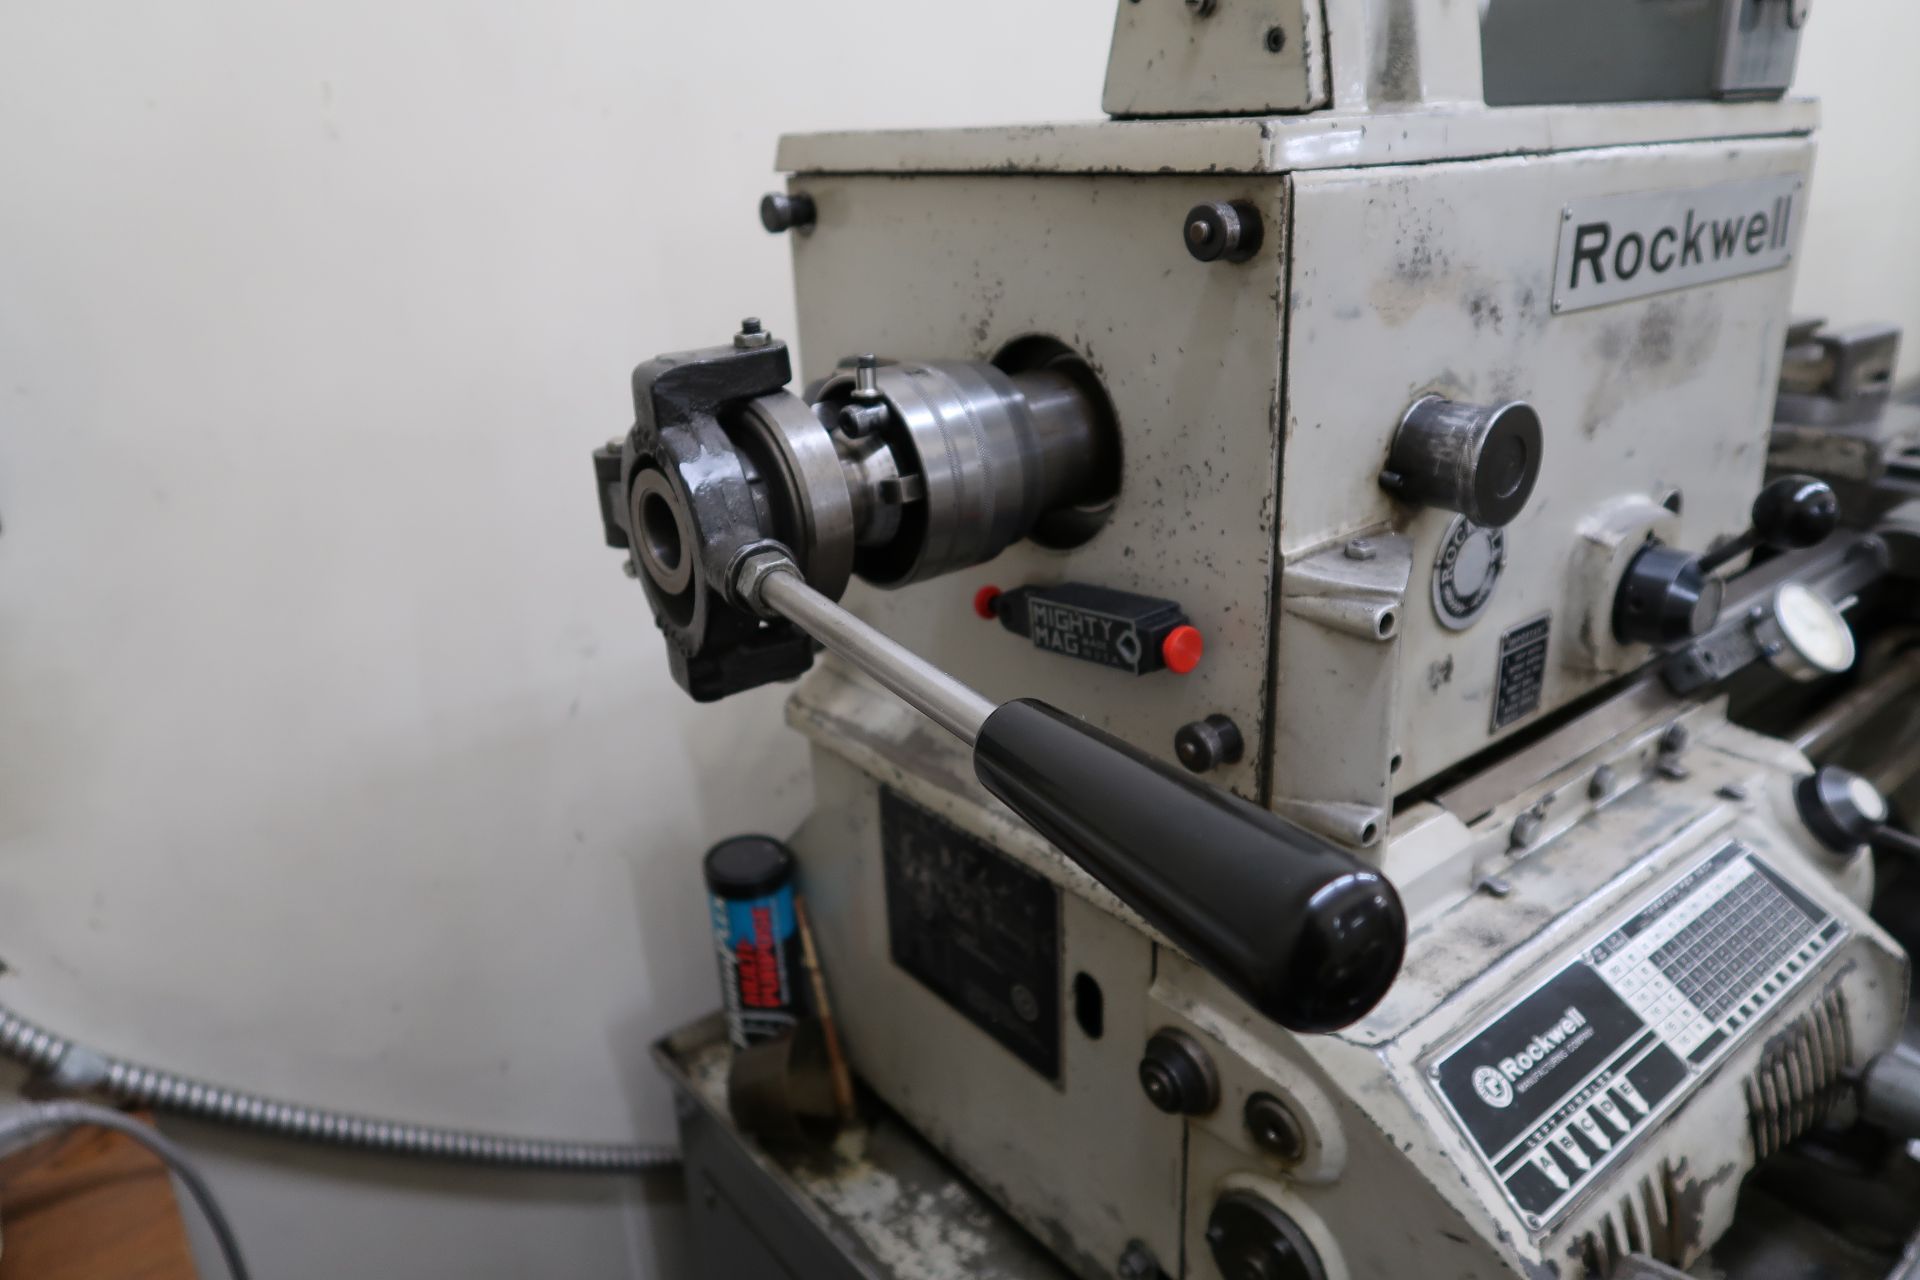 Rockwell “Delta 14” 14” x 45” Lathe s/n 1403561 w 40-1600 Adjustable RPM, (SOLD AS IS) - Image 8 of 9